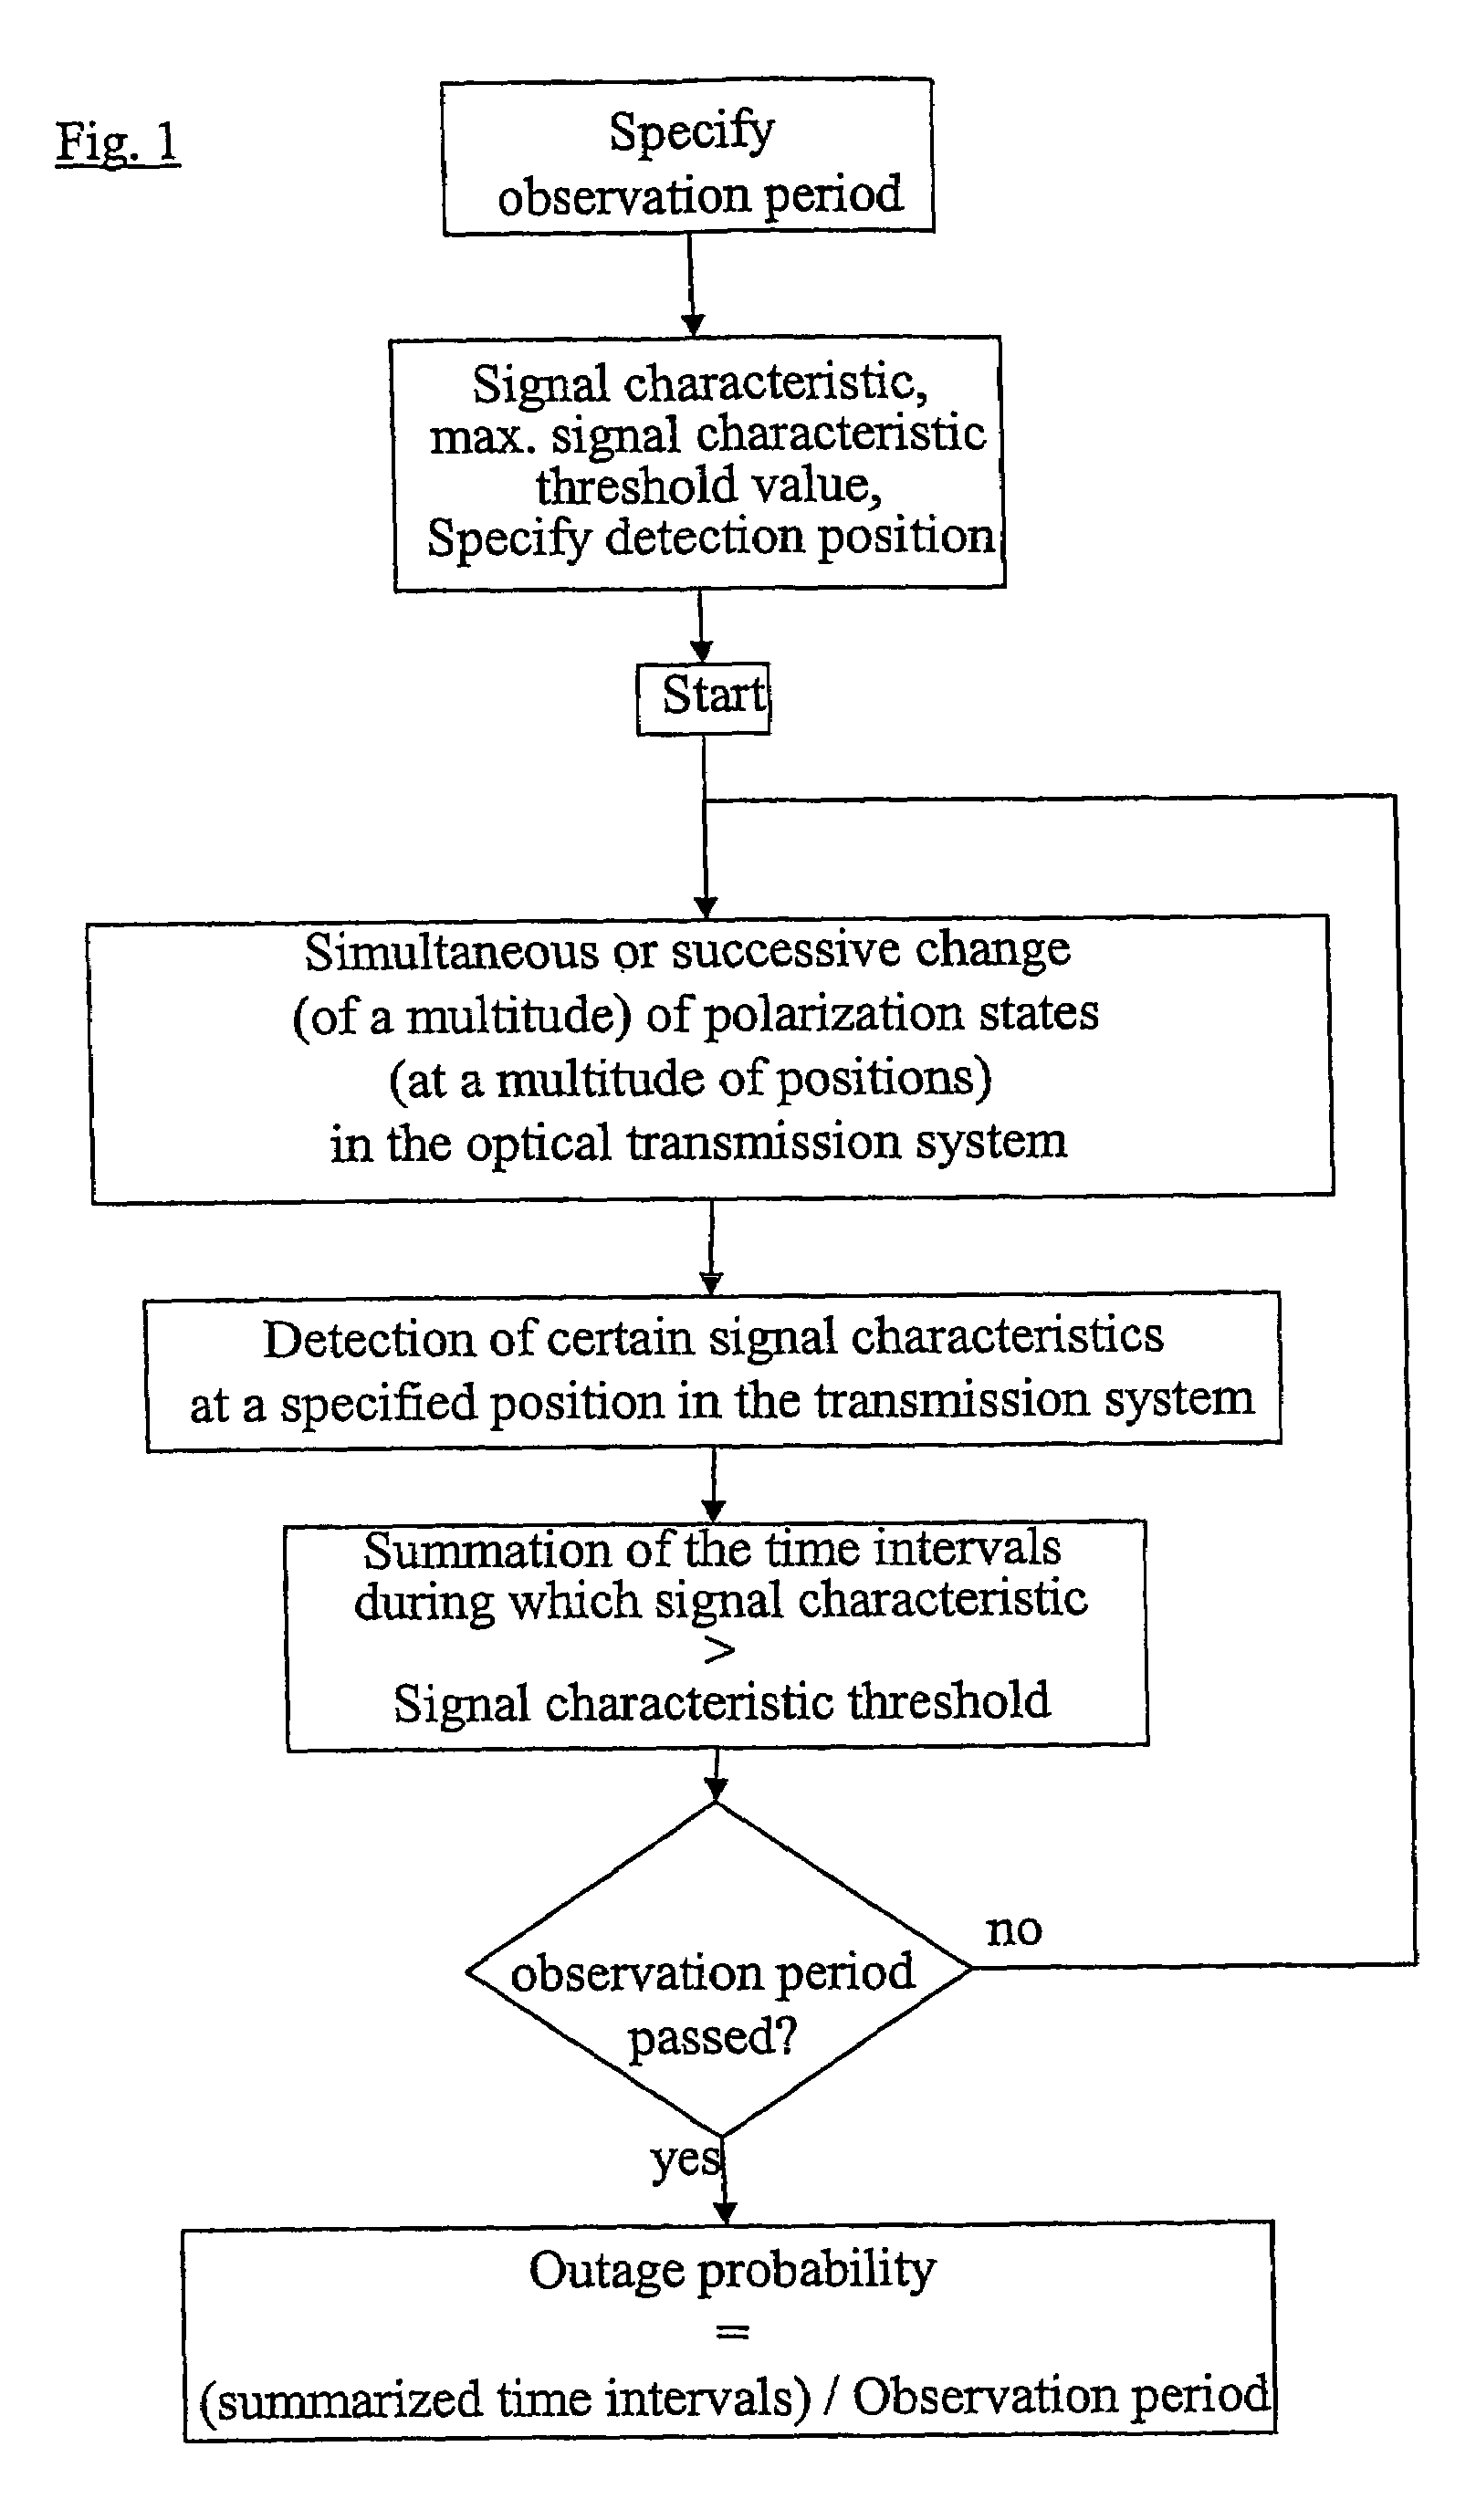 Processes and devices for the determination of a PMD-induced outage probability of an optical transmission system